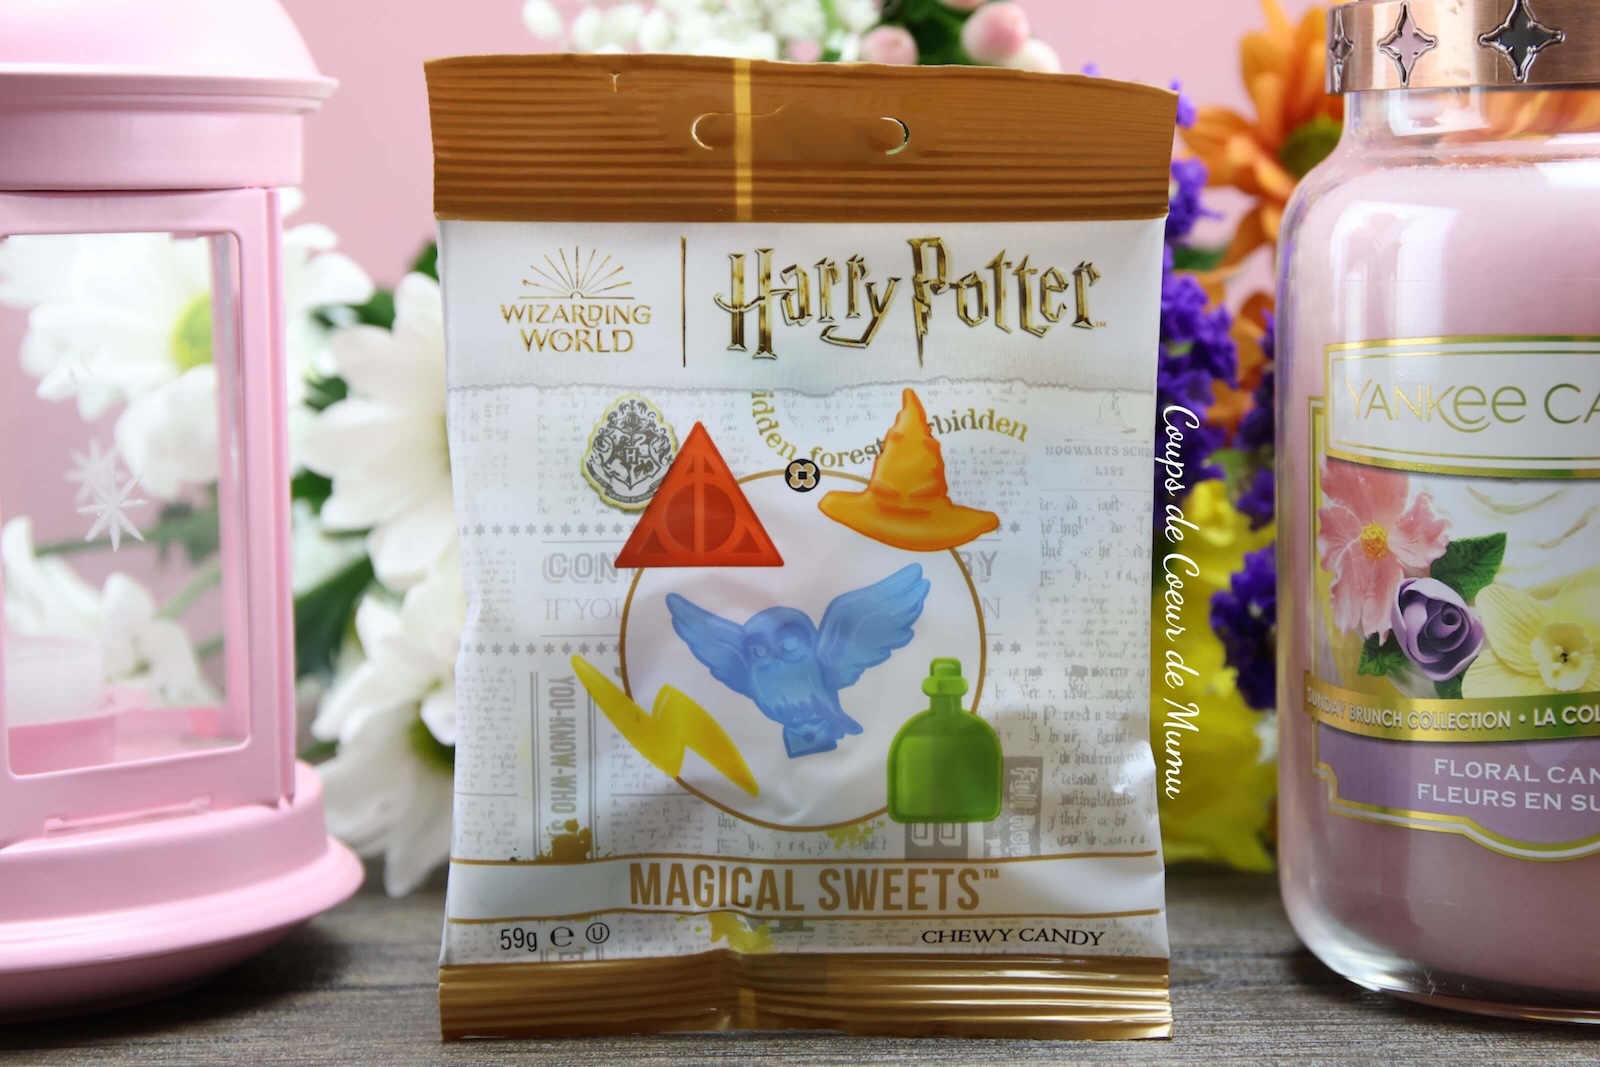 Harry Potter Magical Sweets Jelly Belly